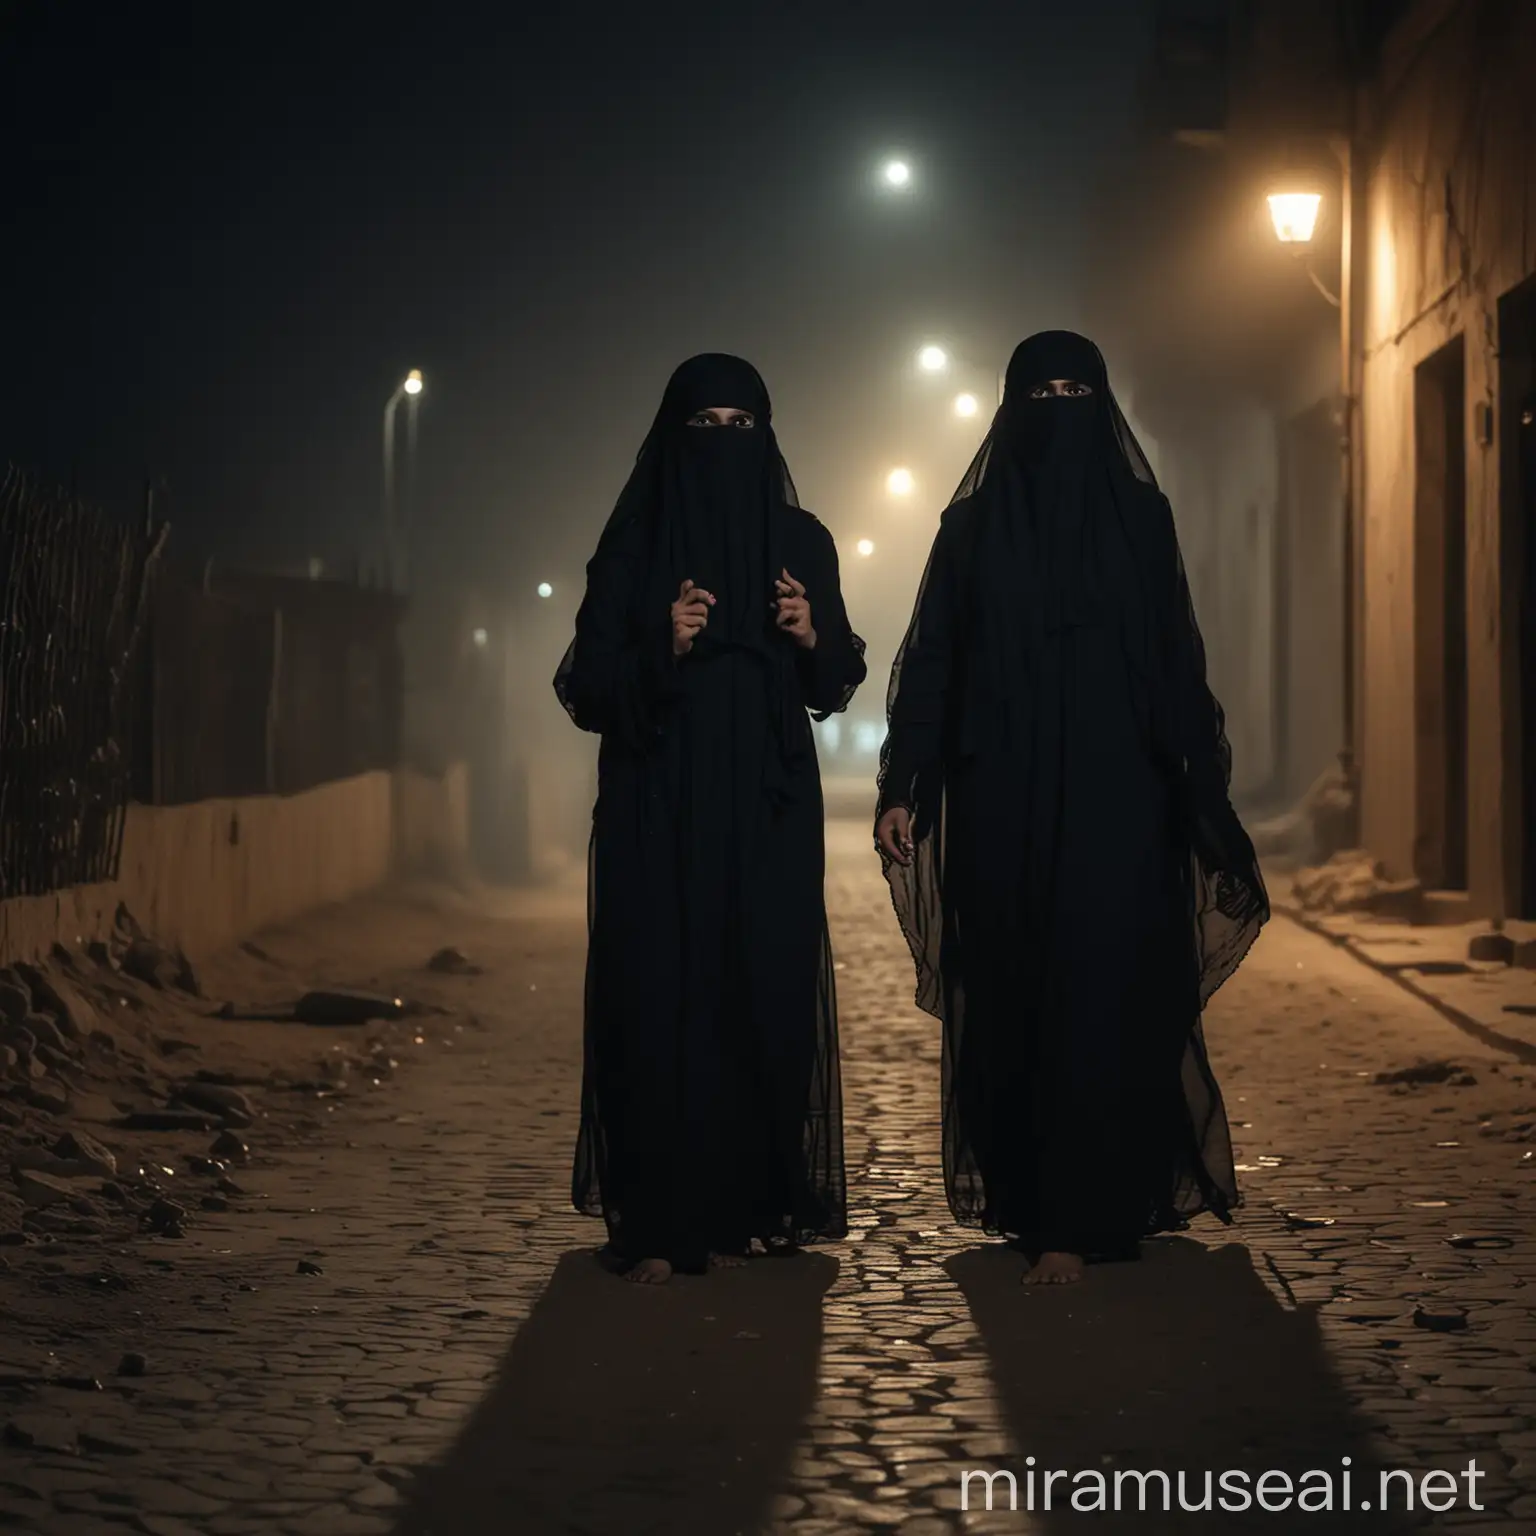 Two Scared Women in Burkha Standing in the Night